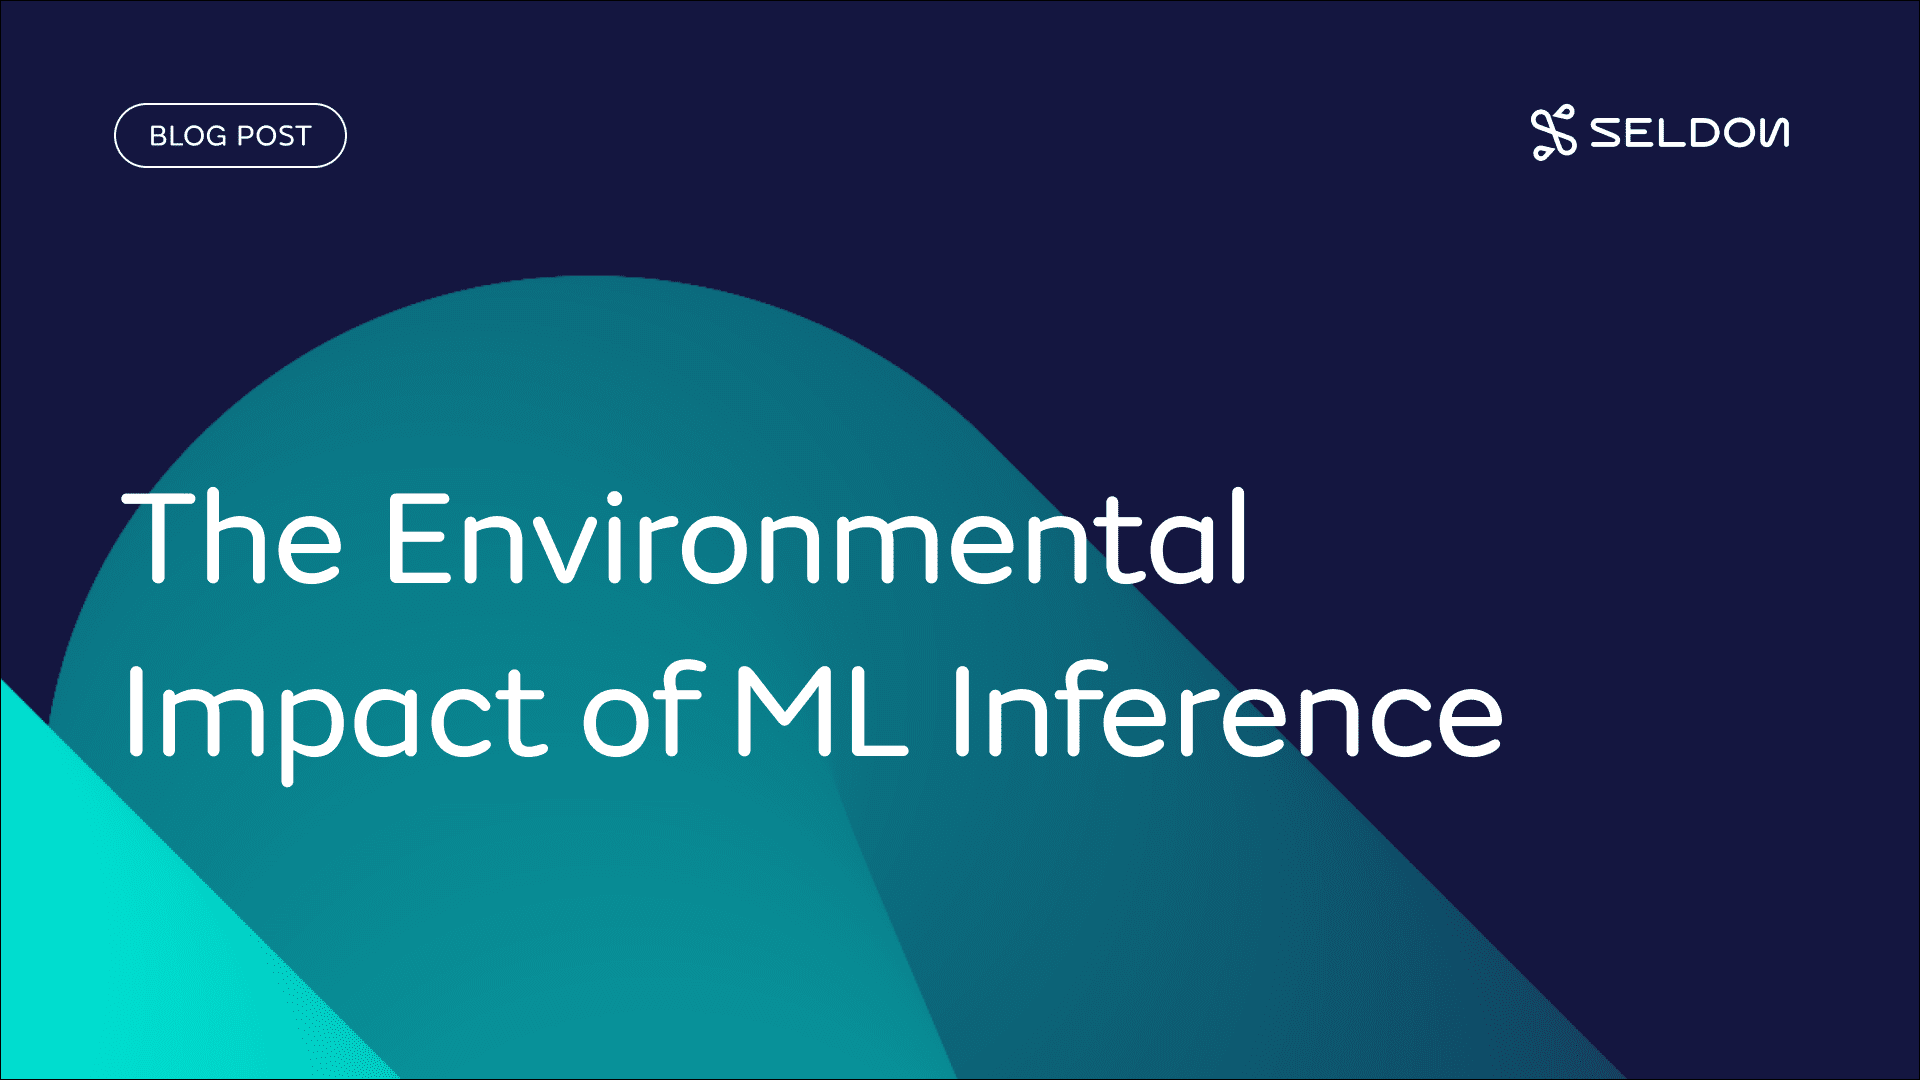 The Environmental Impact of ML Inference